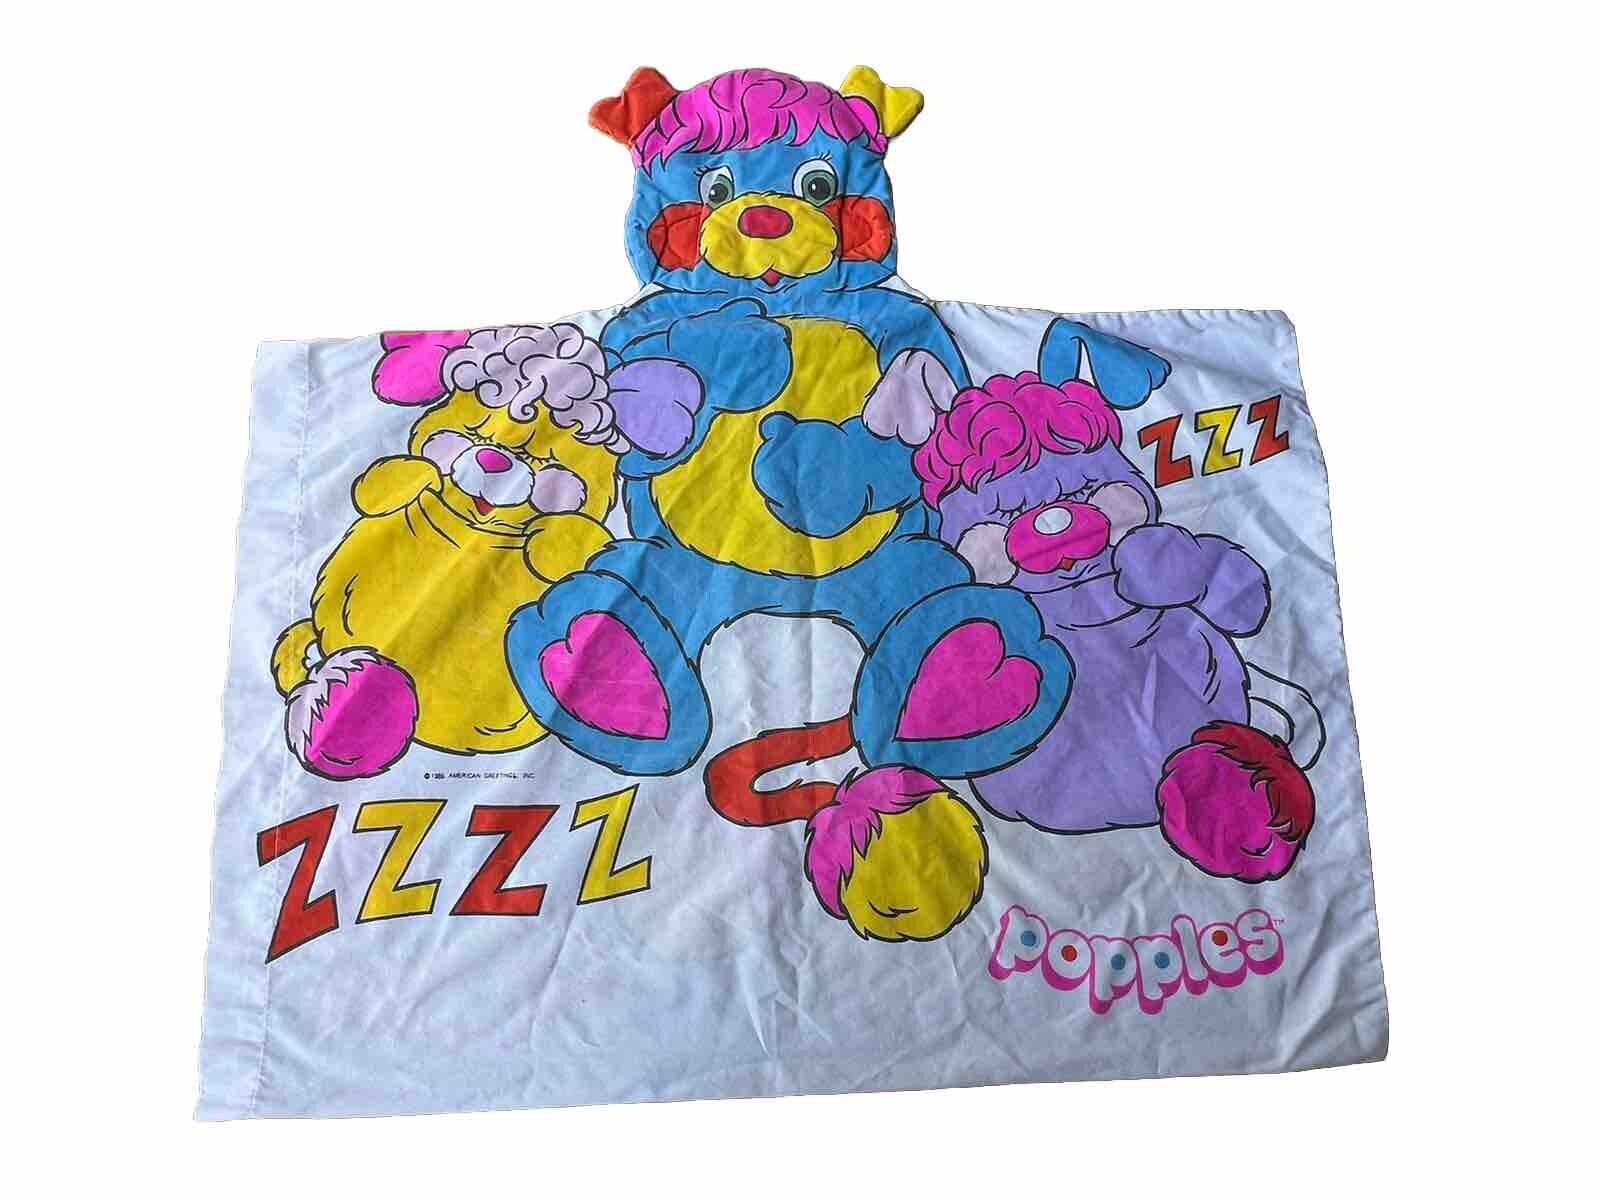 Vintage 1986 Popples Pillowcase Pillow Case American Greetings Great Condition